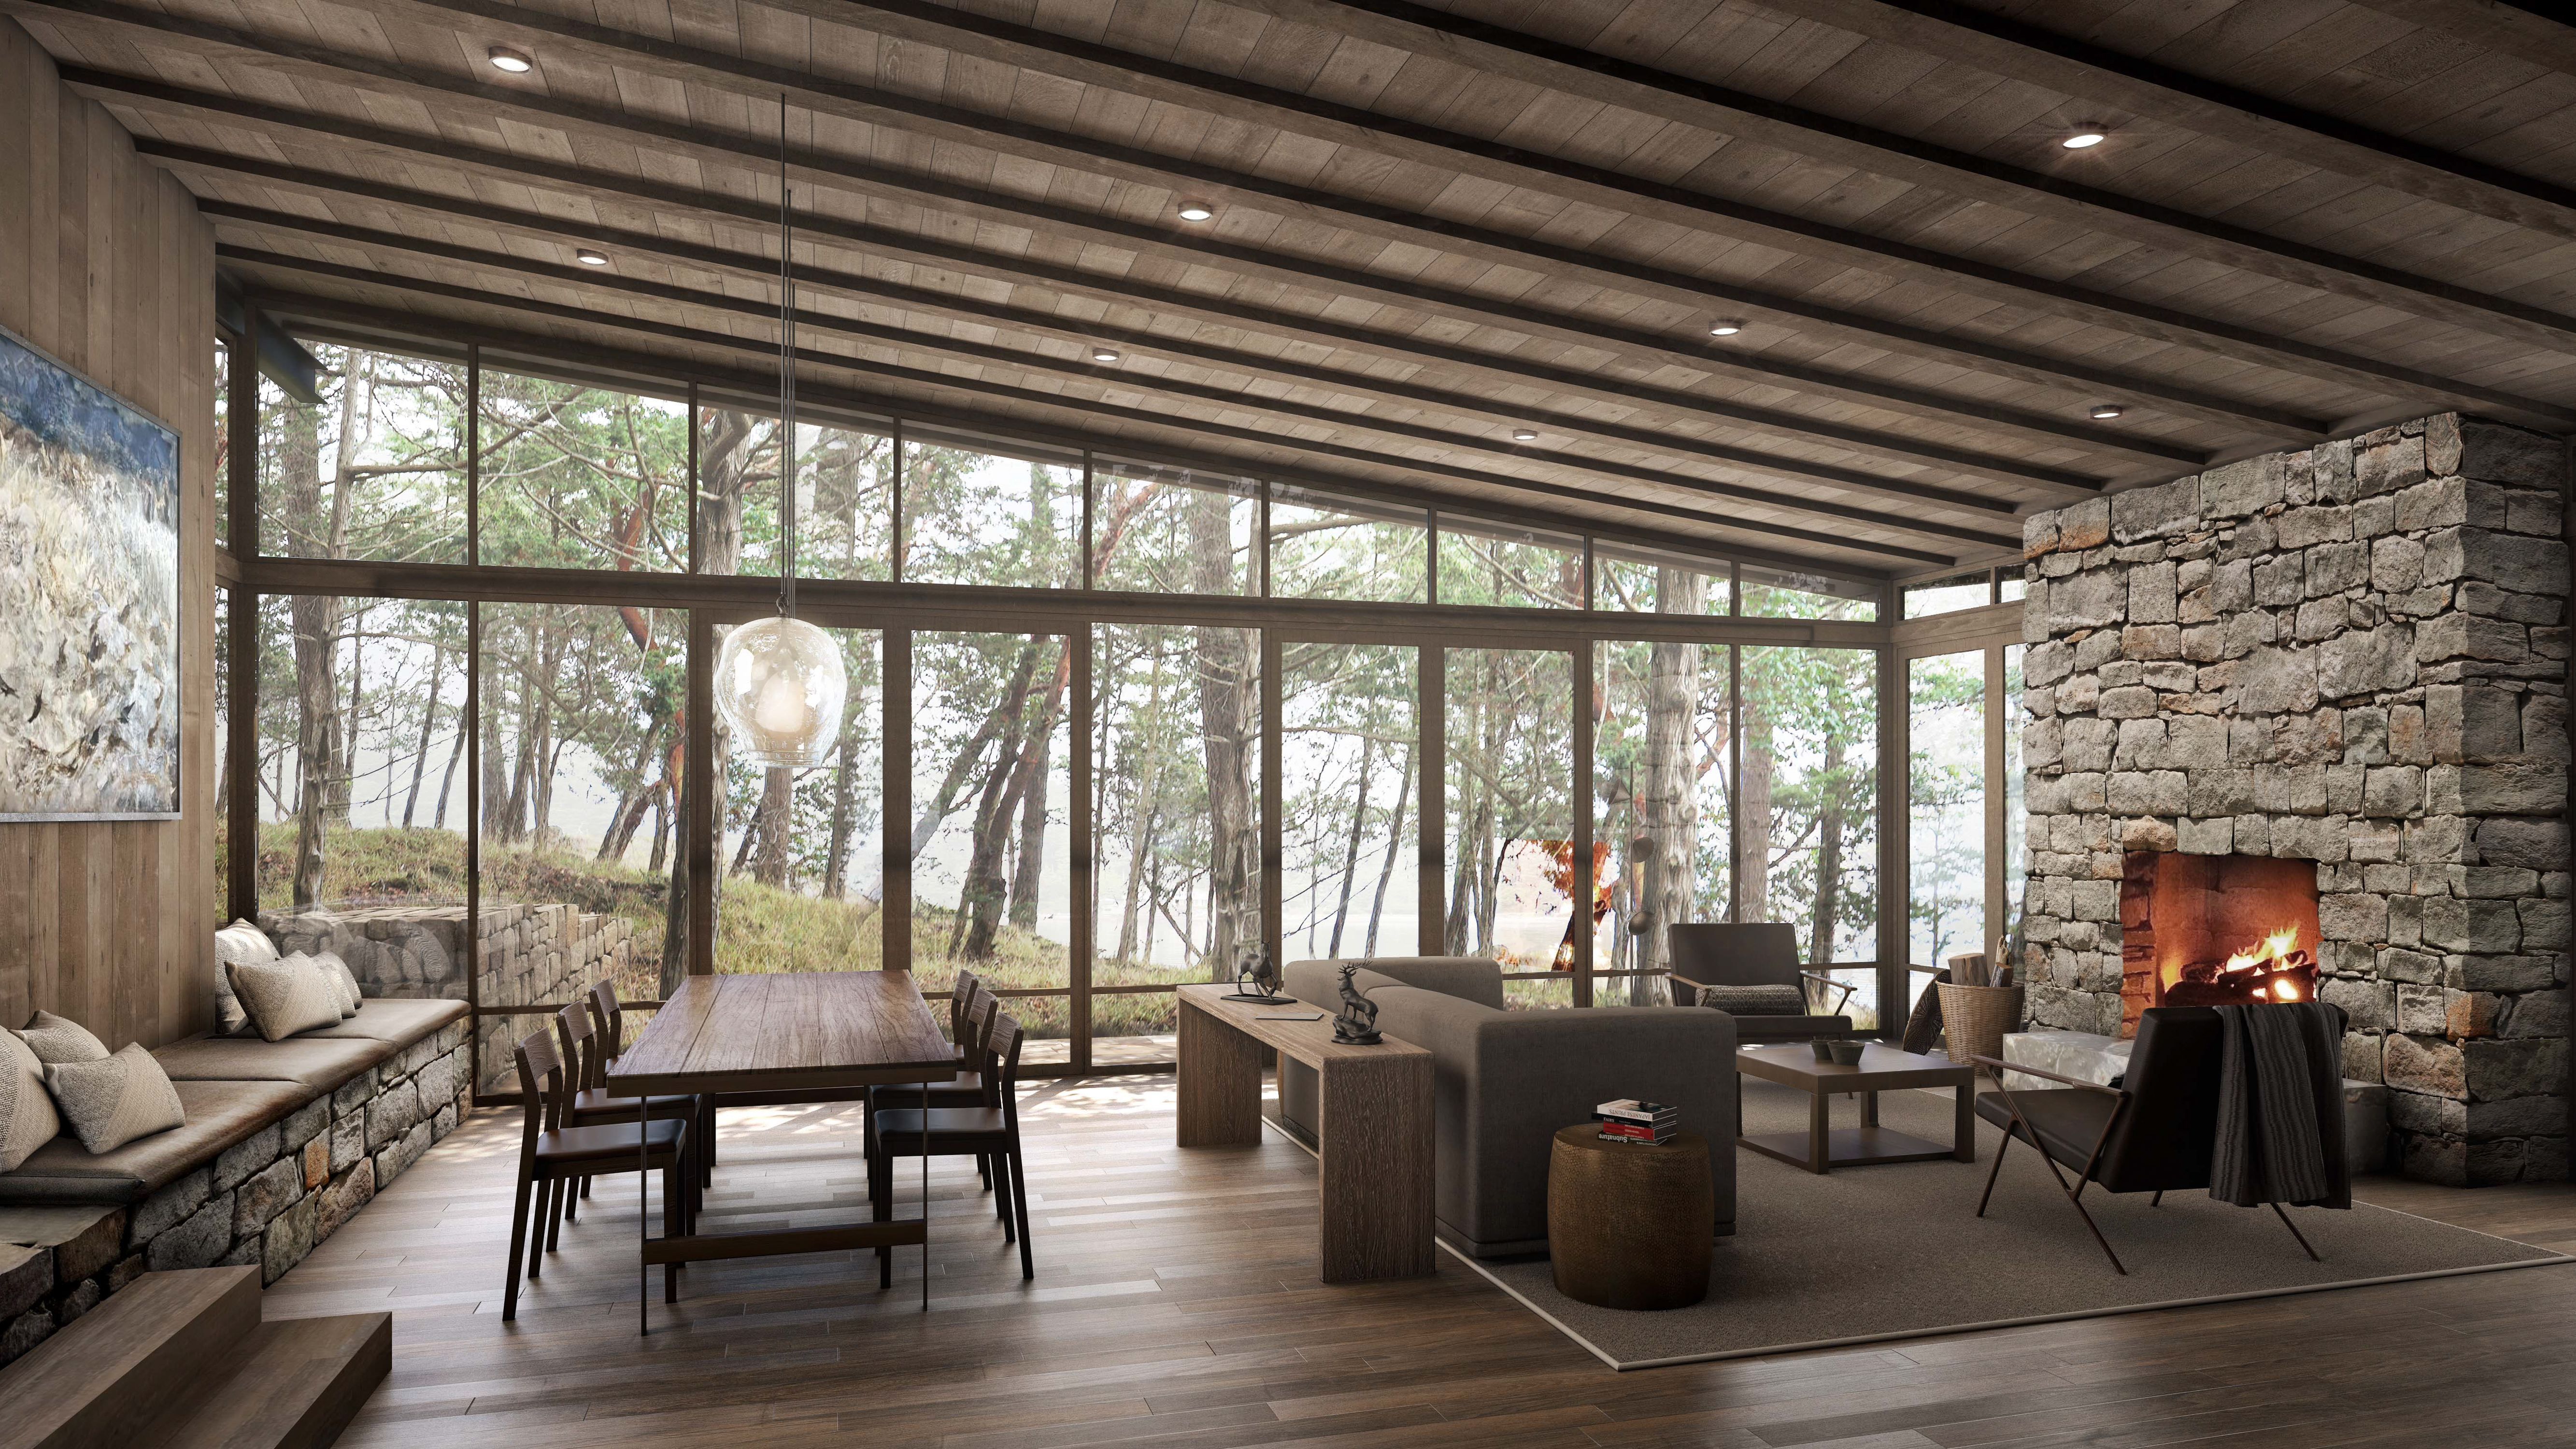 Open floor plan dining and living room with glass walls, offering panoramic views of the surrounding timber and natural landscape.